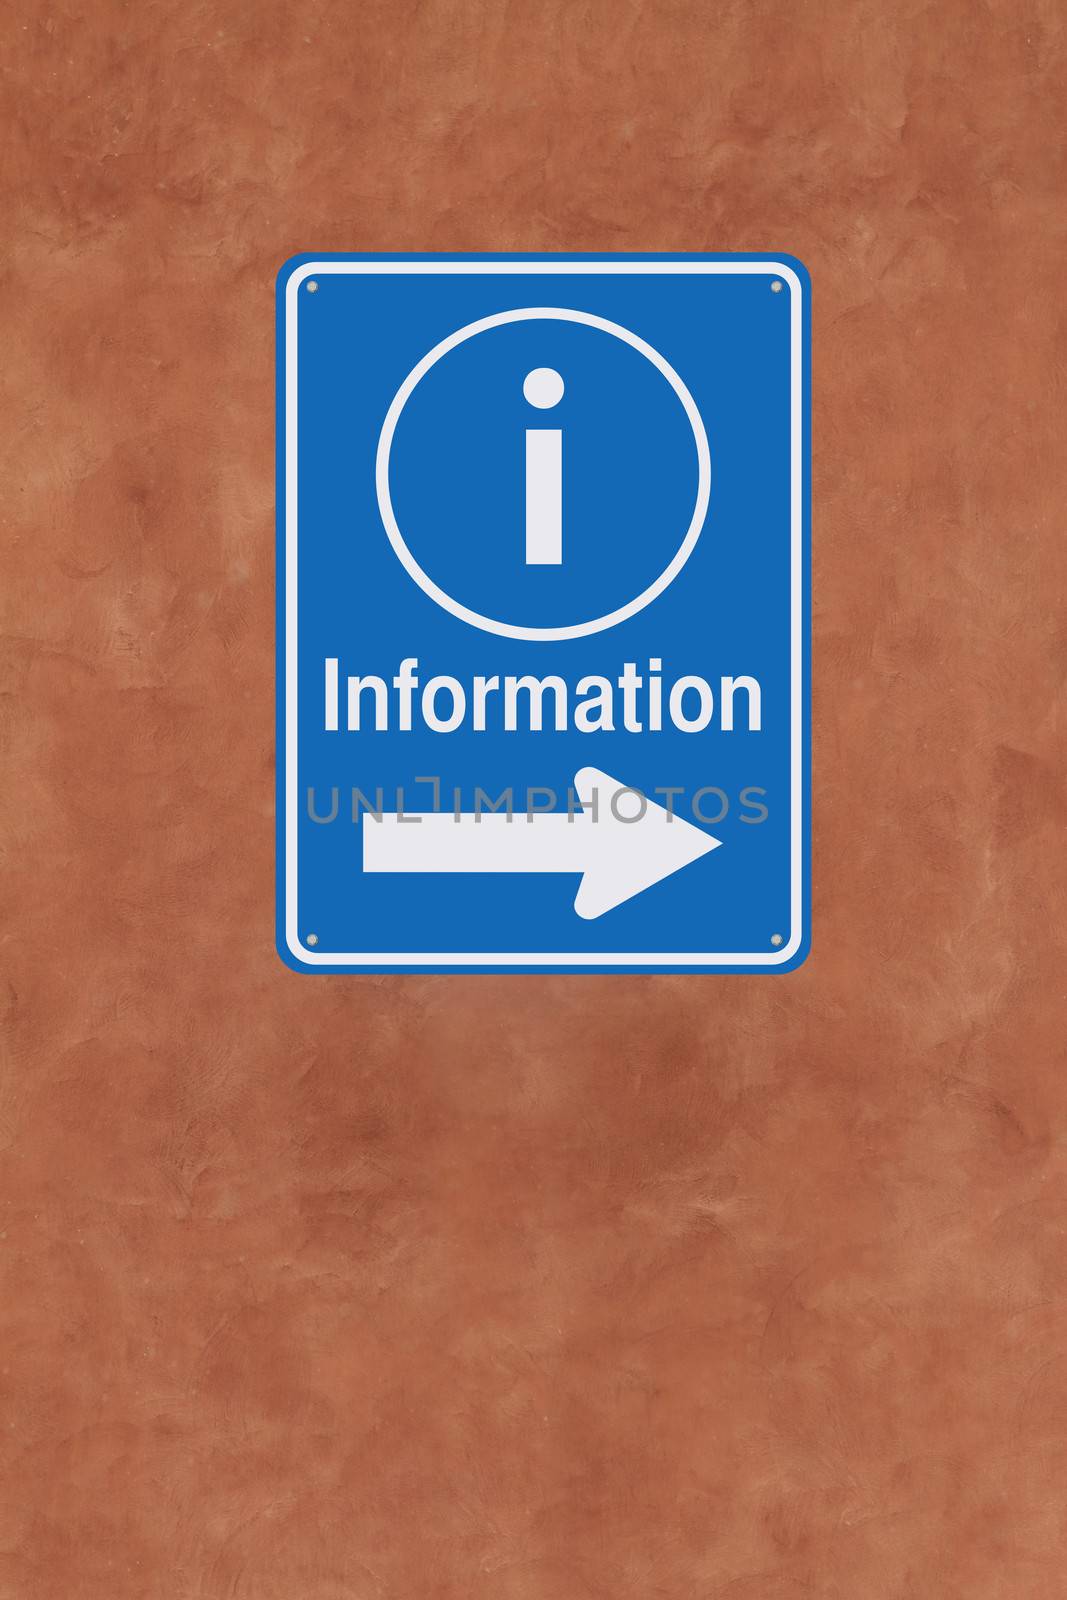 An information sign mounted on a wall